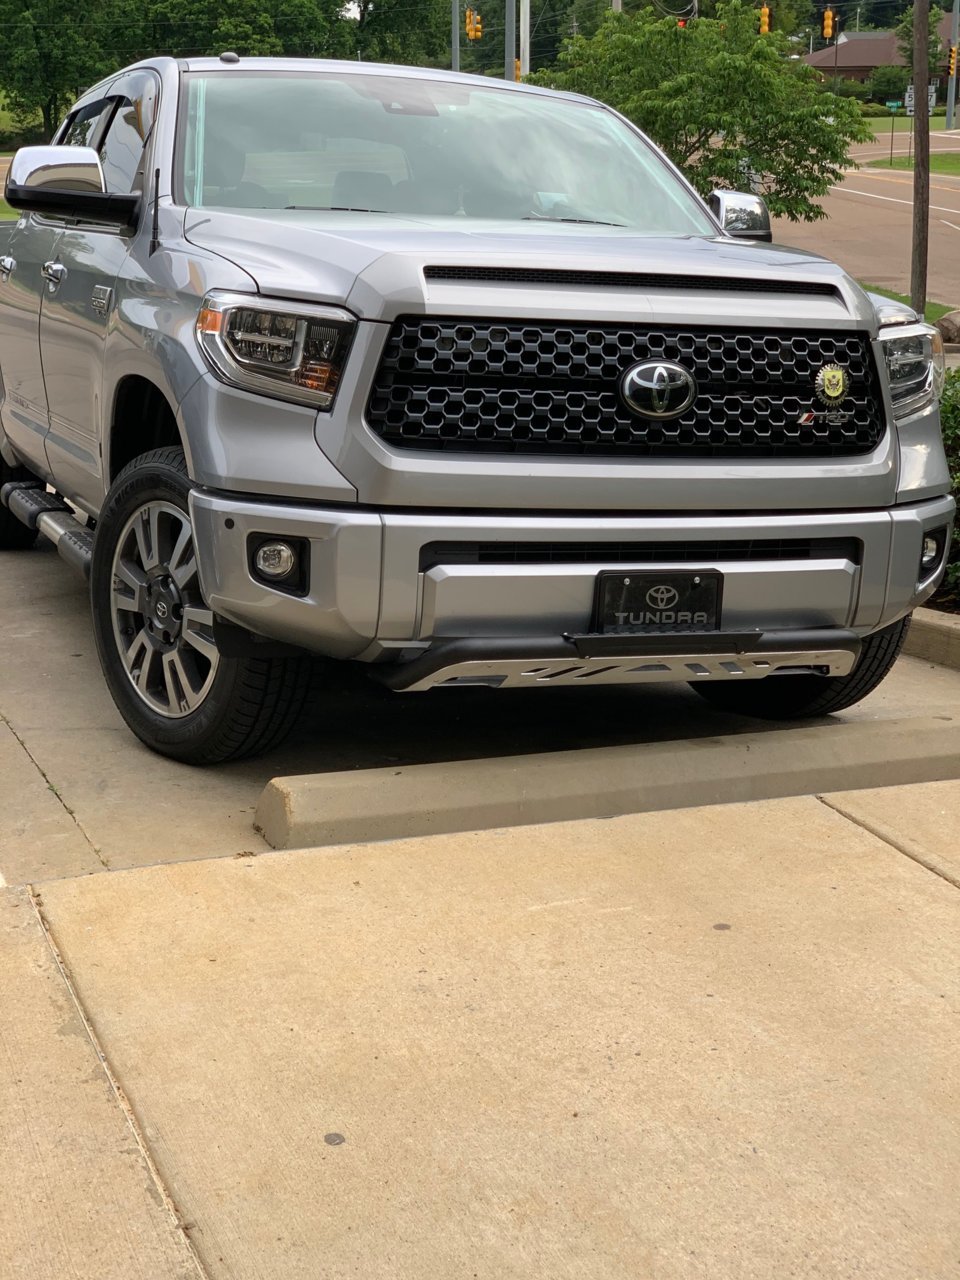 2019 Tundra Platinum with front Skid Plate.jpg